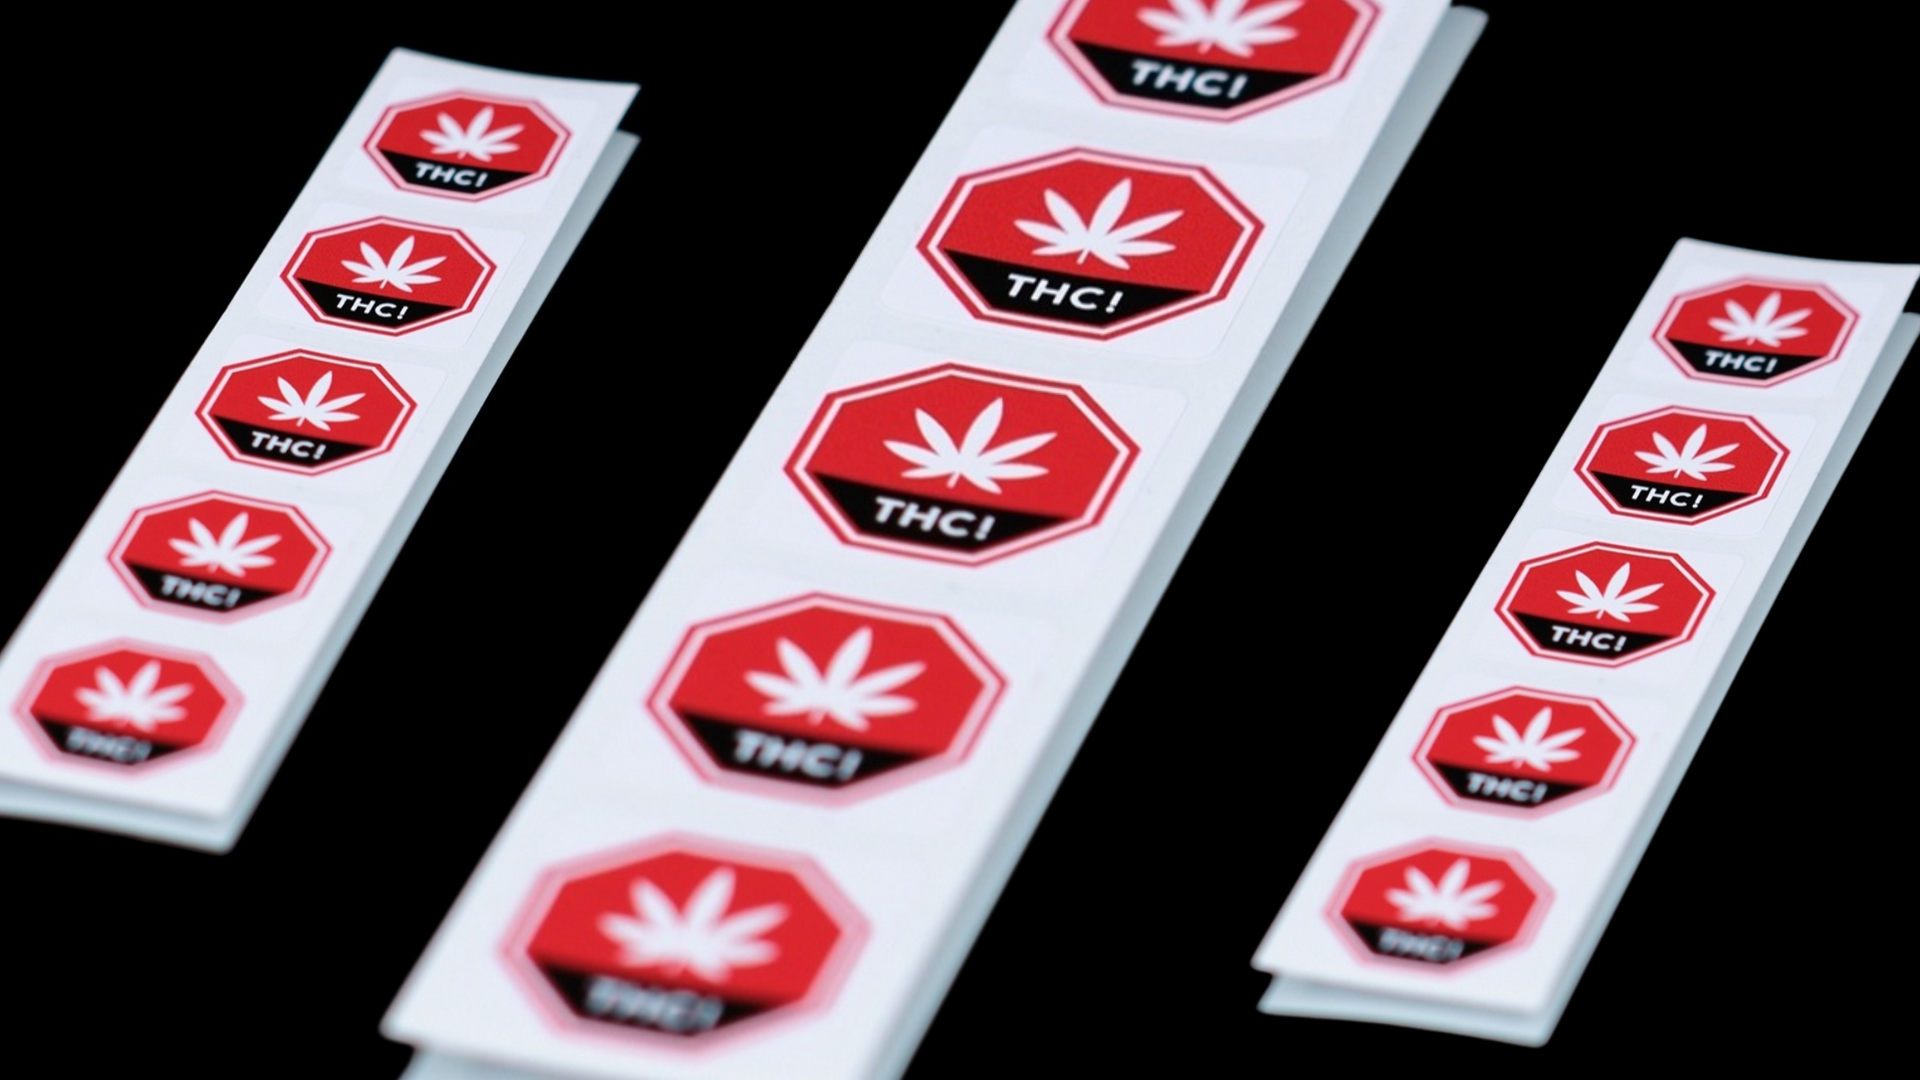 Introducing A Cannabis Warning Label For New Zealand